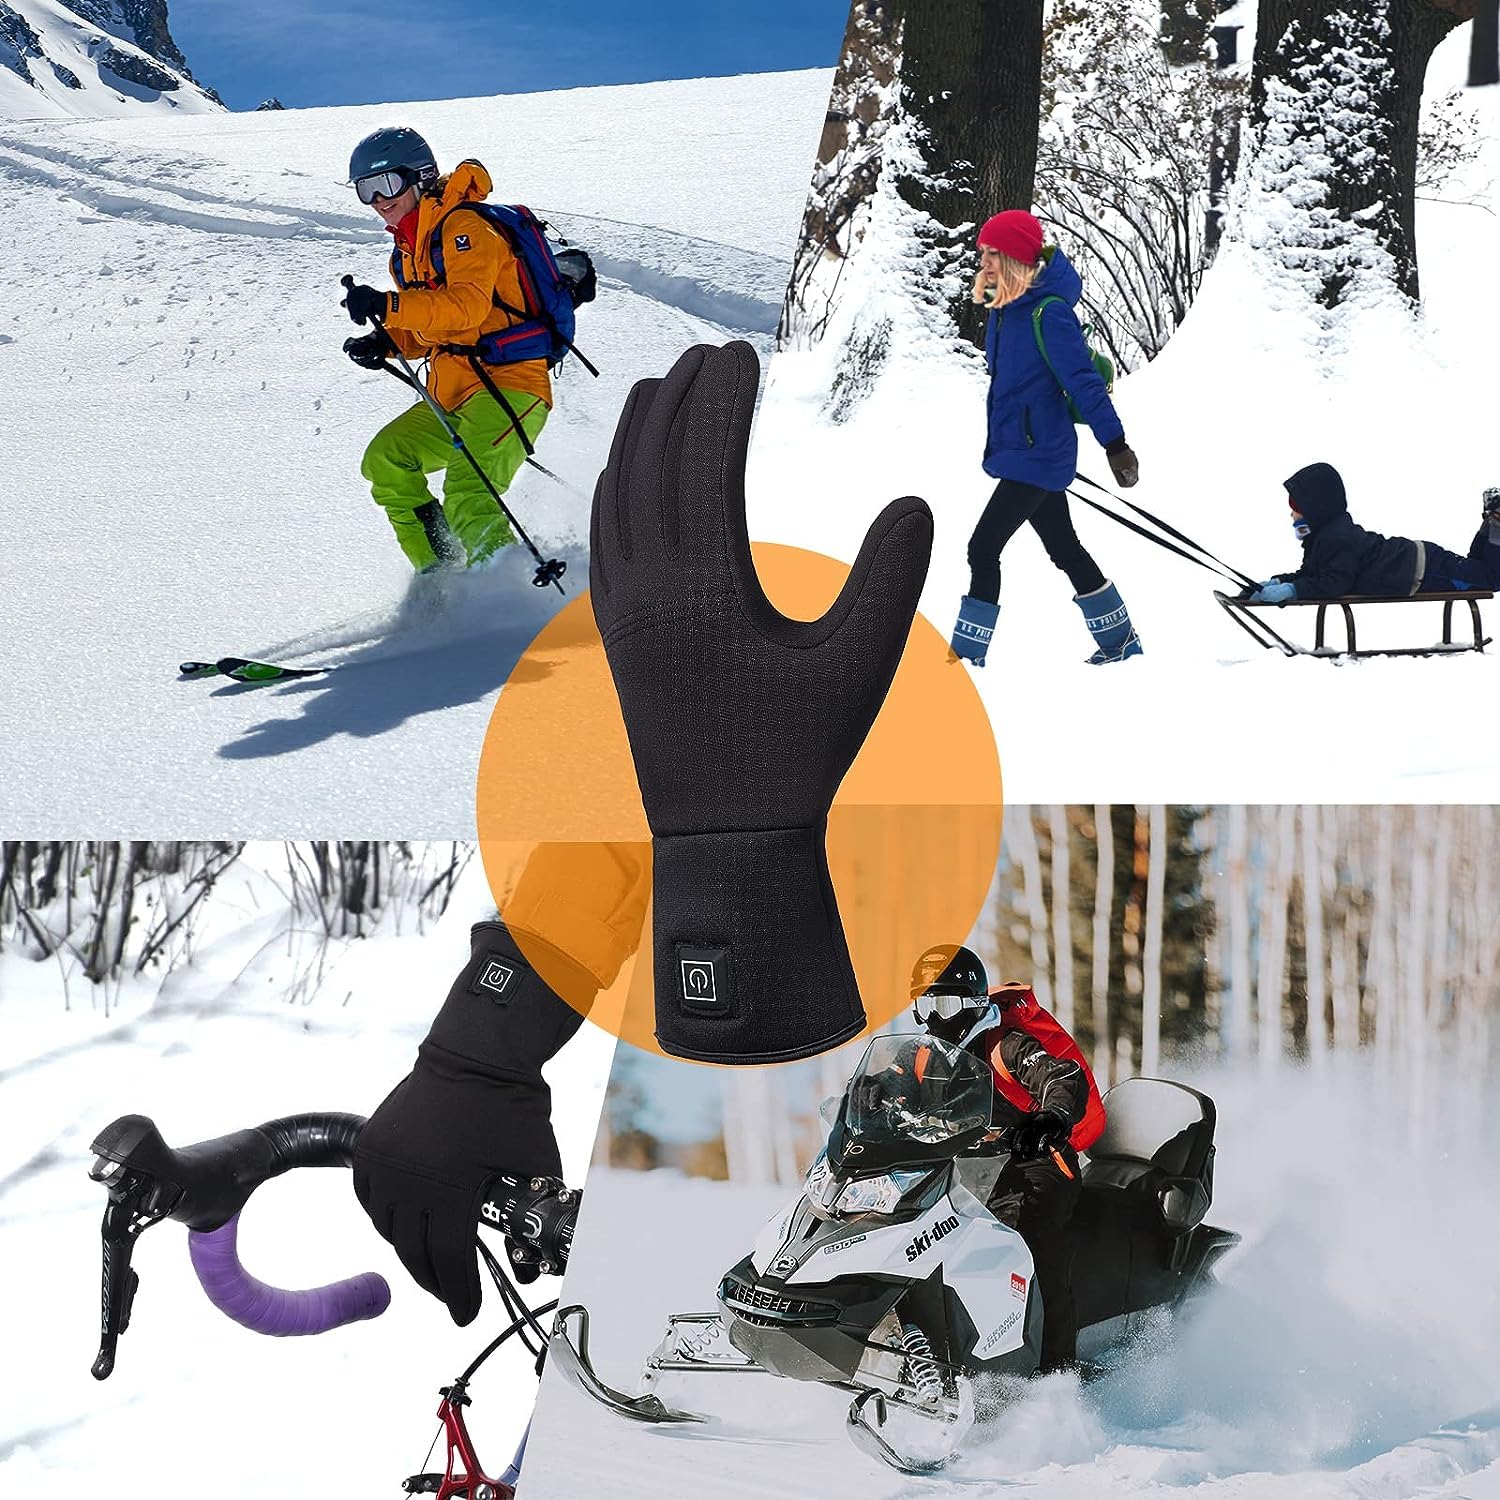 Heated Glove Liners for Men Women, Rechargeable Battery Electric Heated Gloves, Winter Warm Glove Liners for Arthritis Raynaud, Thin Gloves Riding Ski Snowboarding Hiking Cycling Hand Warmers